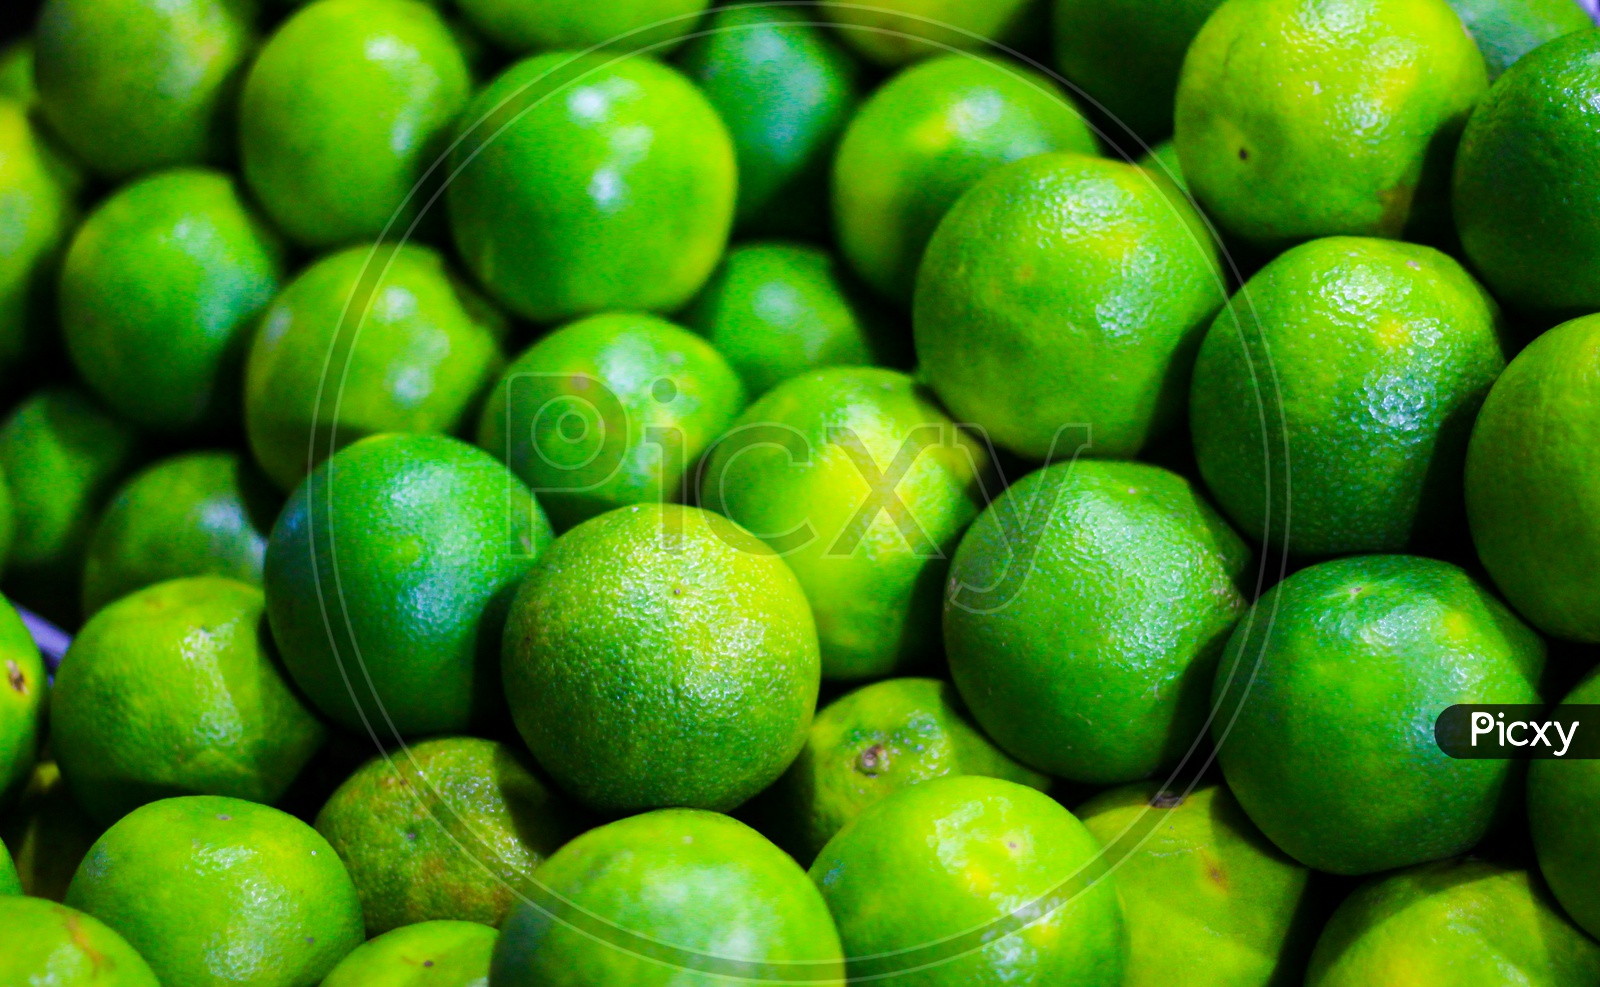 Heap Of Green Sweet Lime For Sale In Market